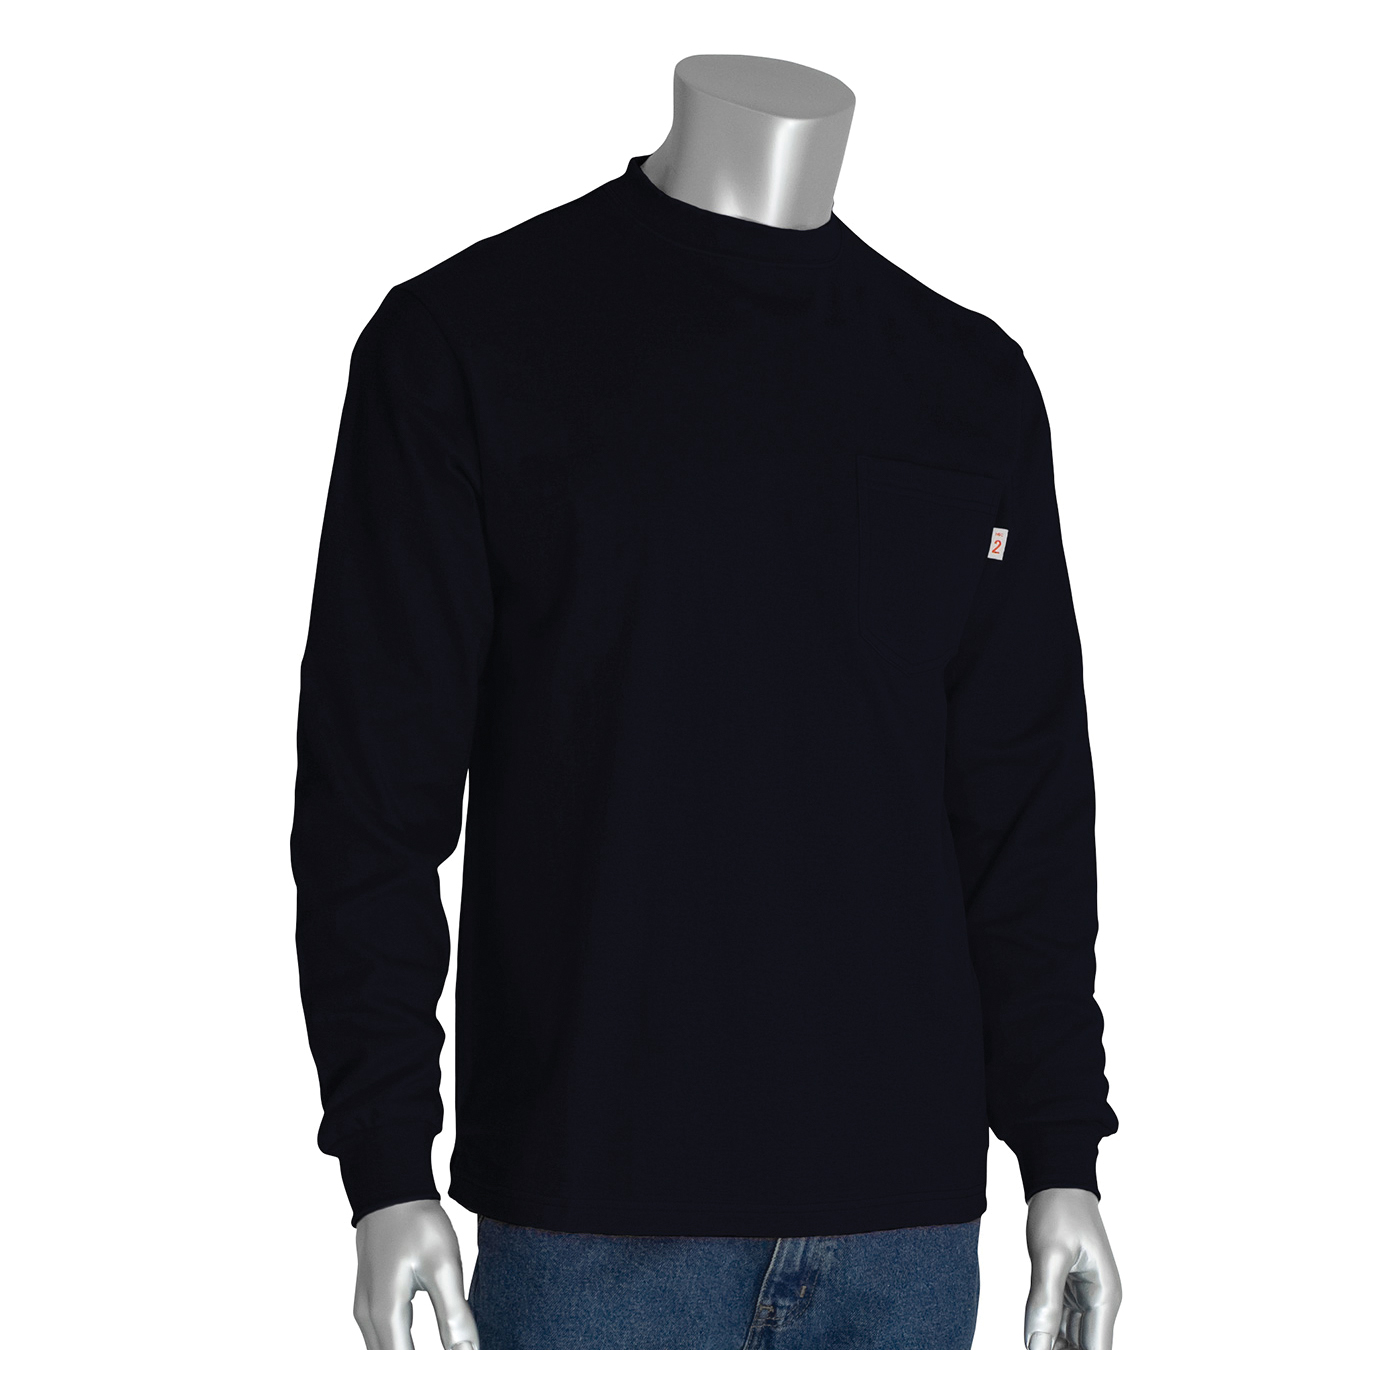 PIP® 385-FRLS-(NV)-3X Arc and Flame-Resistant Long Sleeve T-Shirt, 3XL, Navy, Cotton Interlock Knit, 35 in L